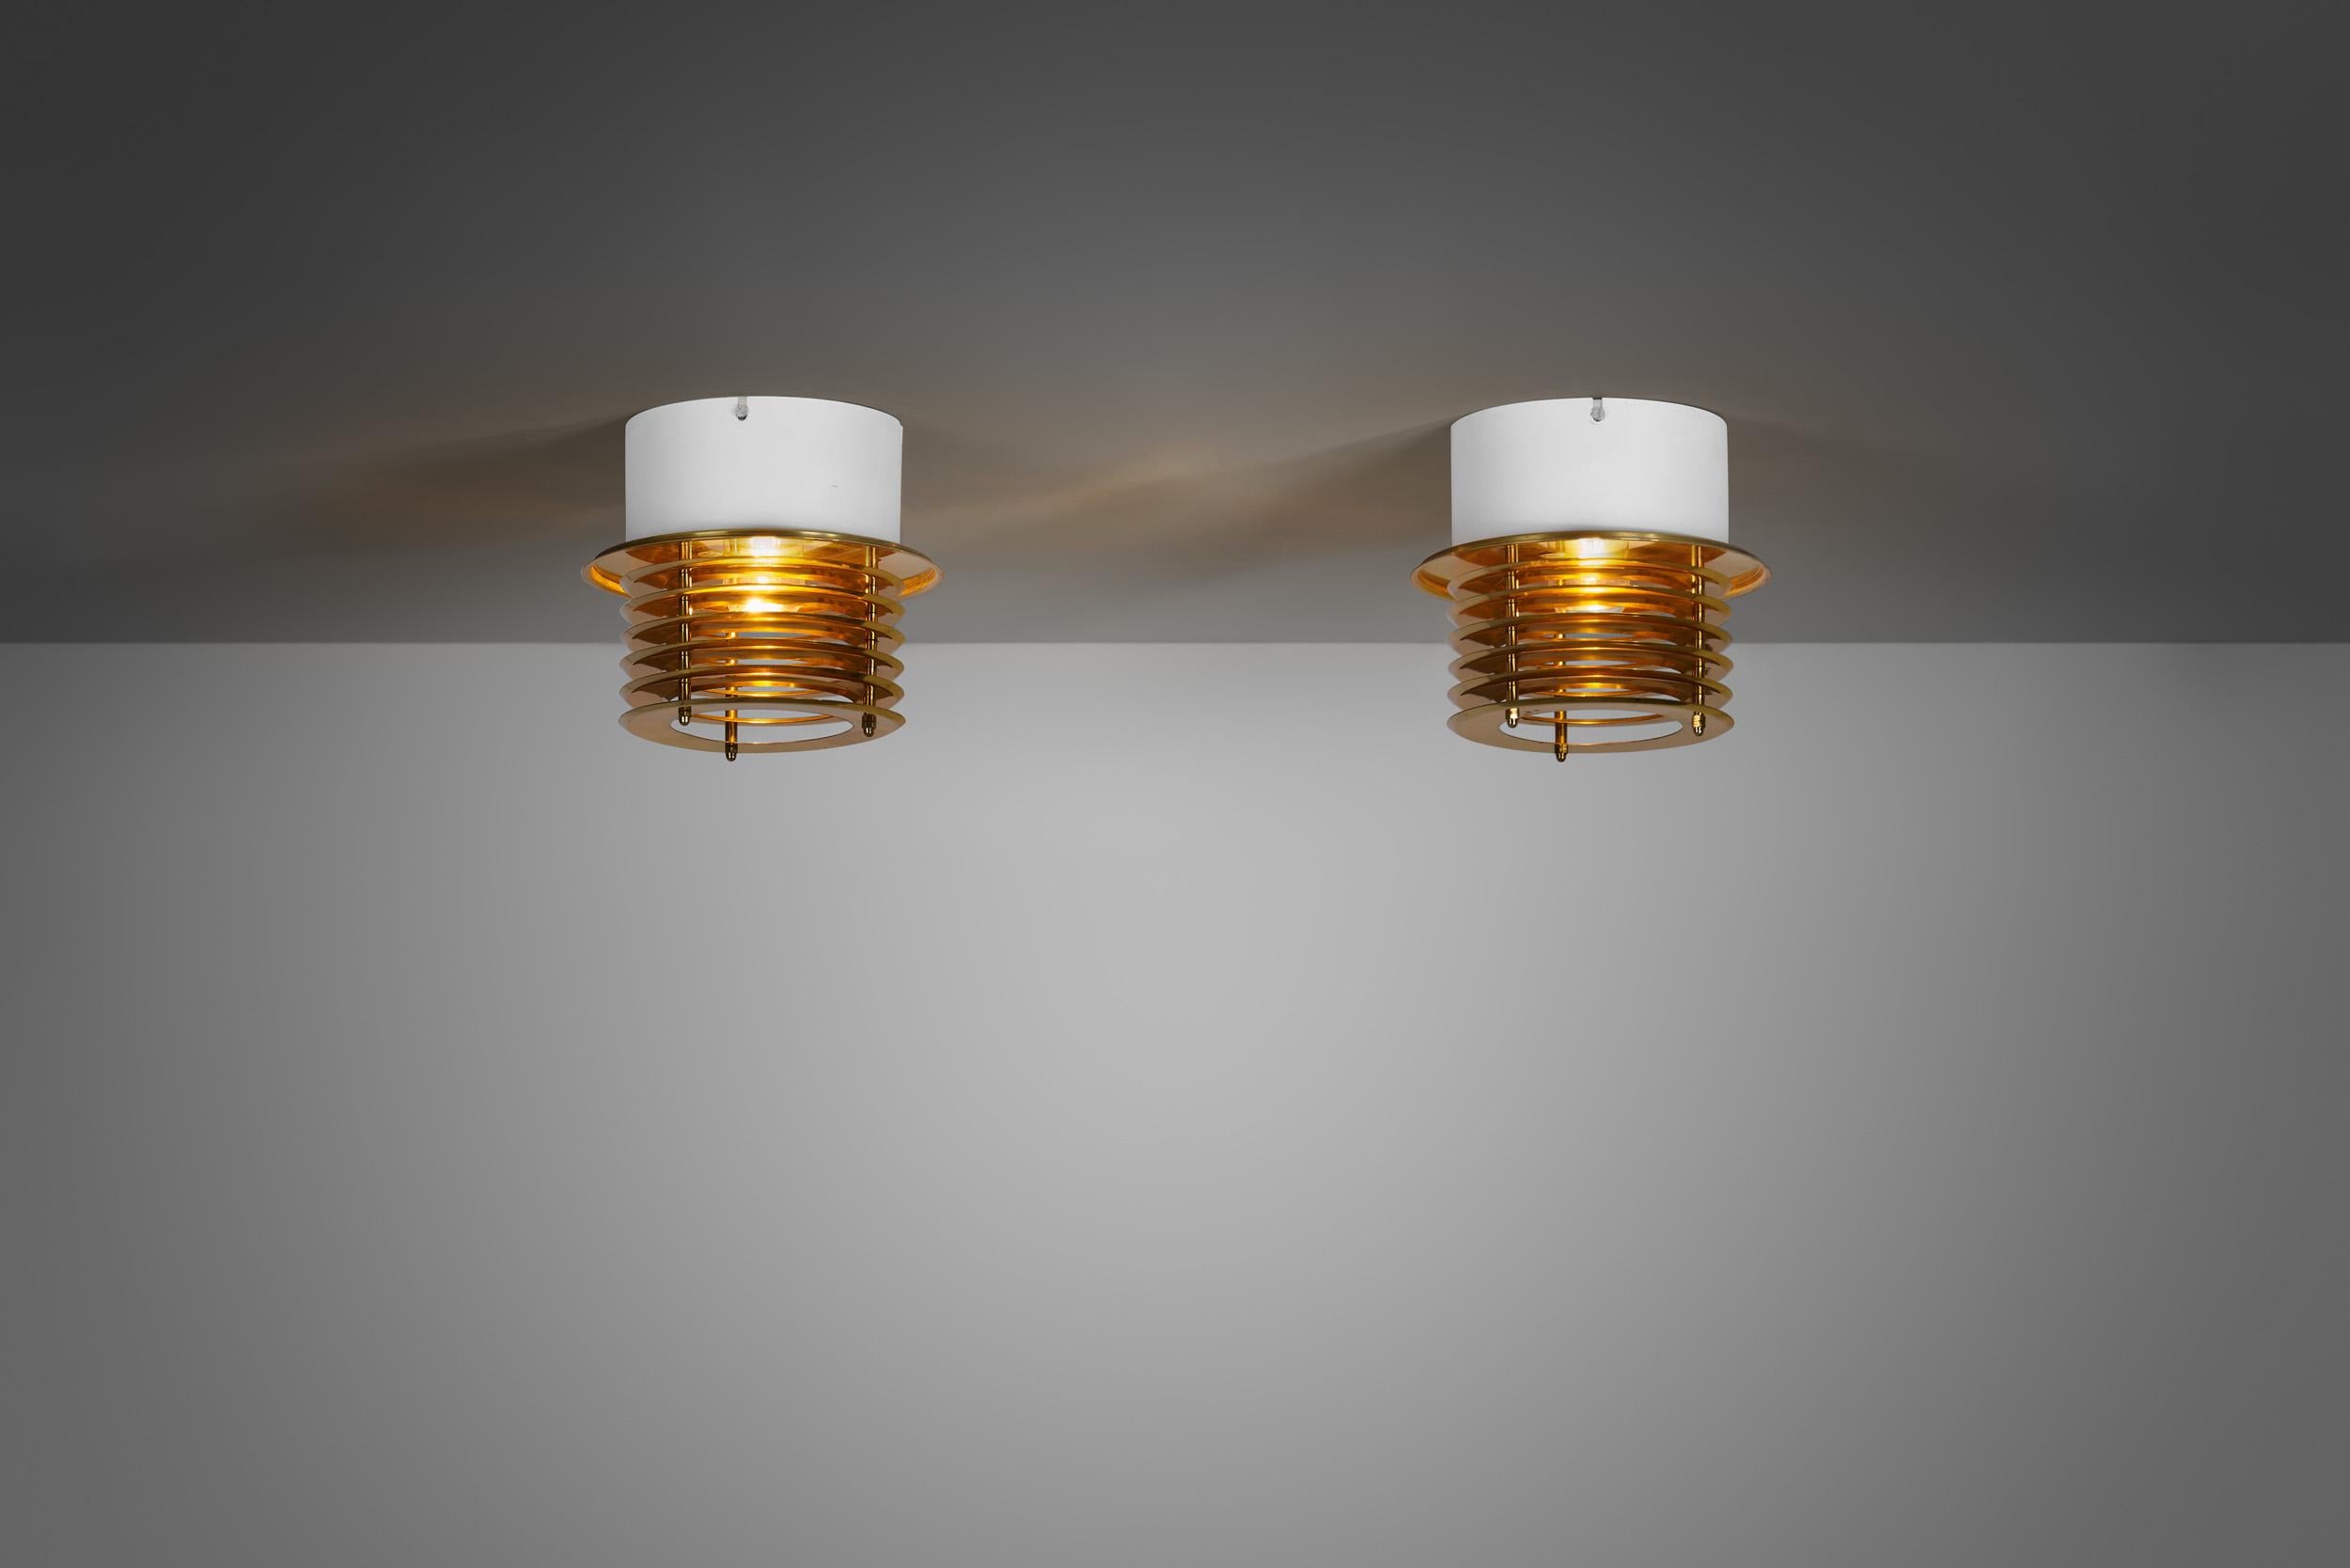 Swedish Brass and Metal Ceiling Lamps by Taiba-Falkenberg Belysnin, Sweden 1960s For Sale